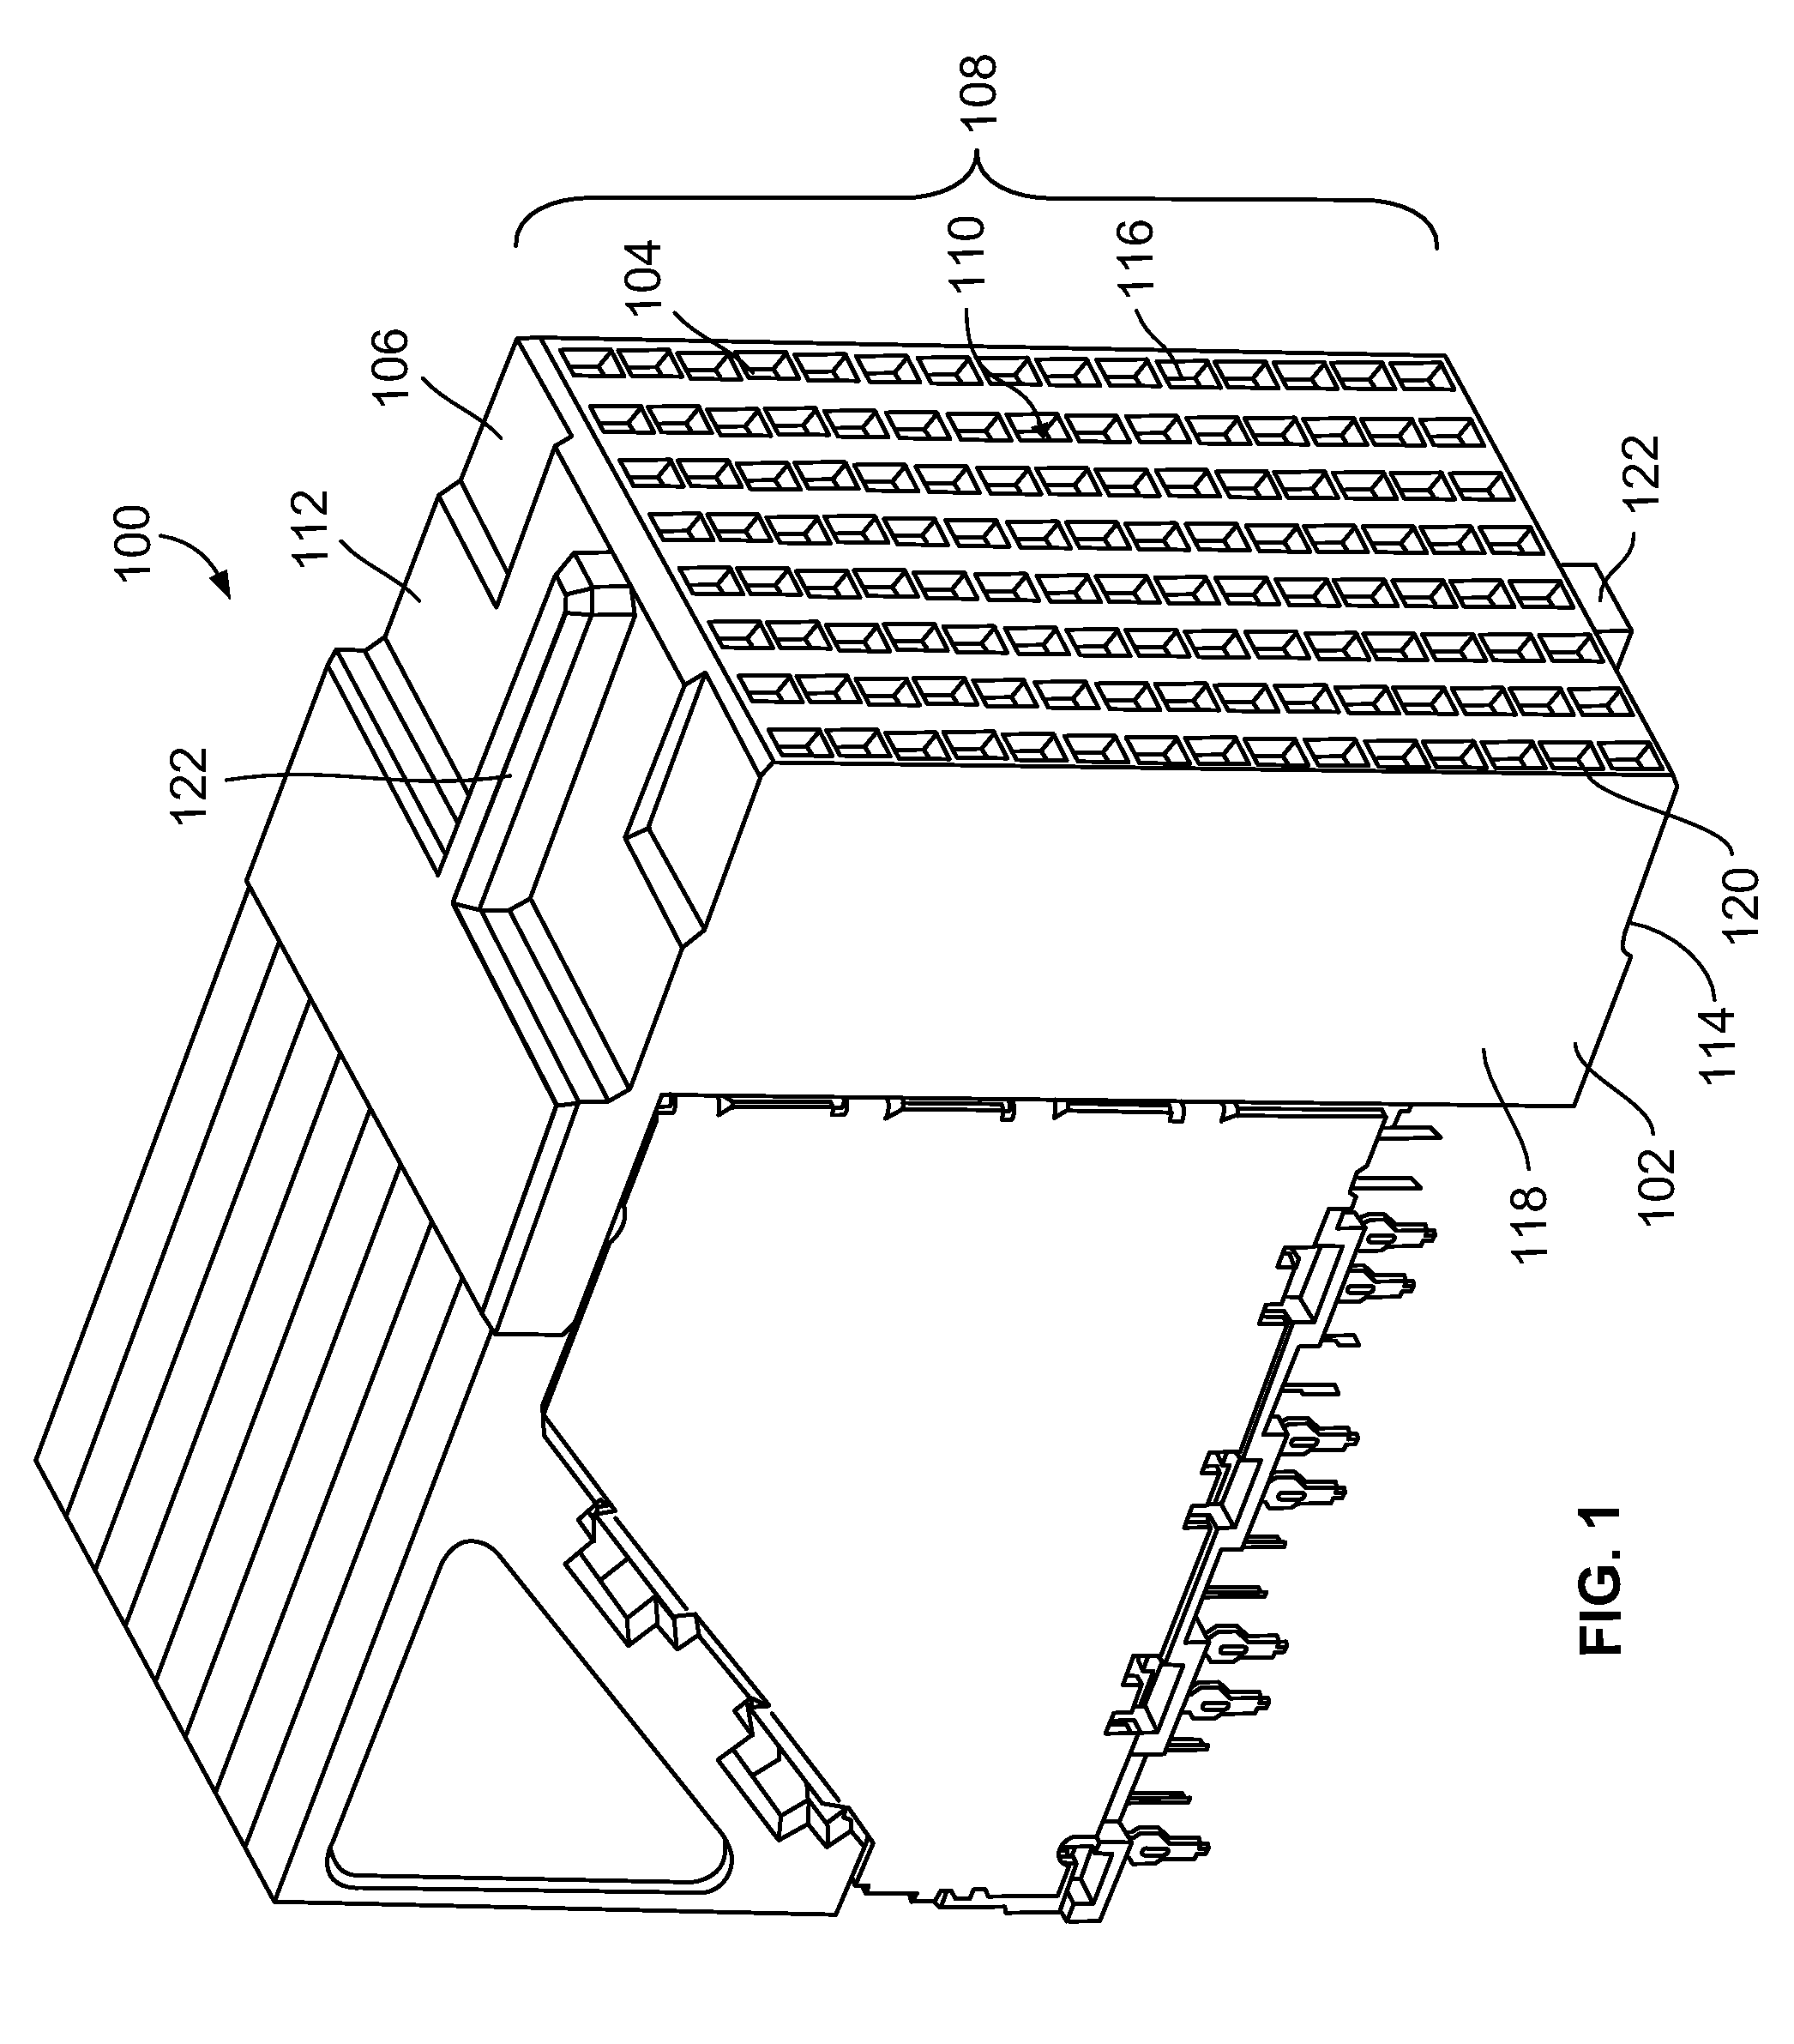 Compliant pin for retaining and electrically connecting a shield with a connector assembly